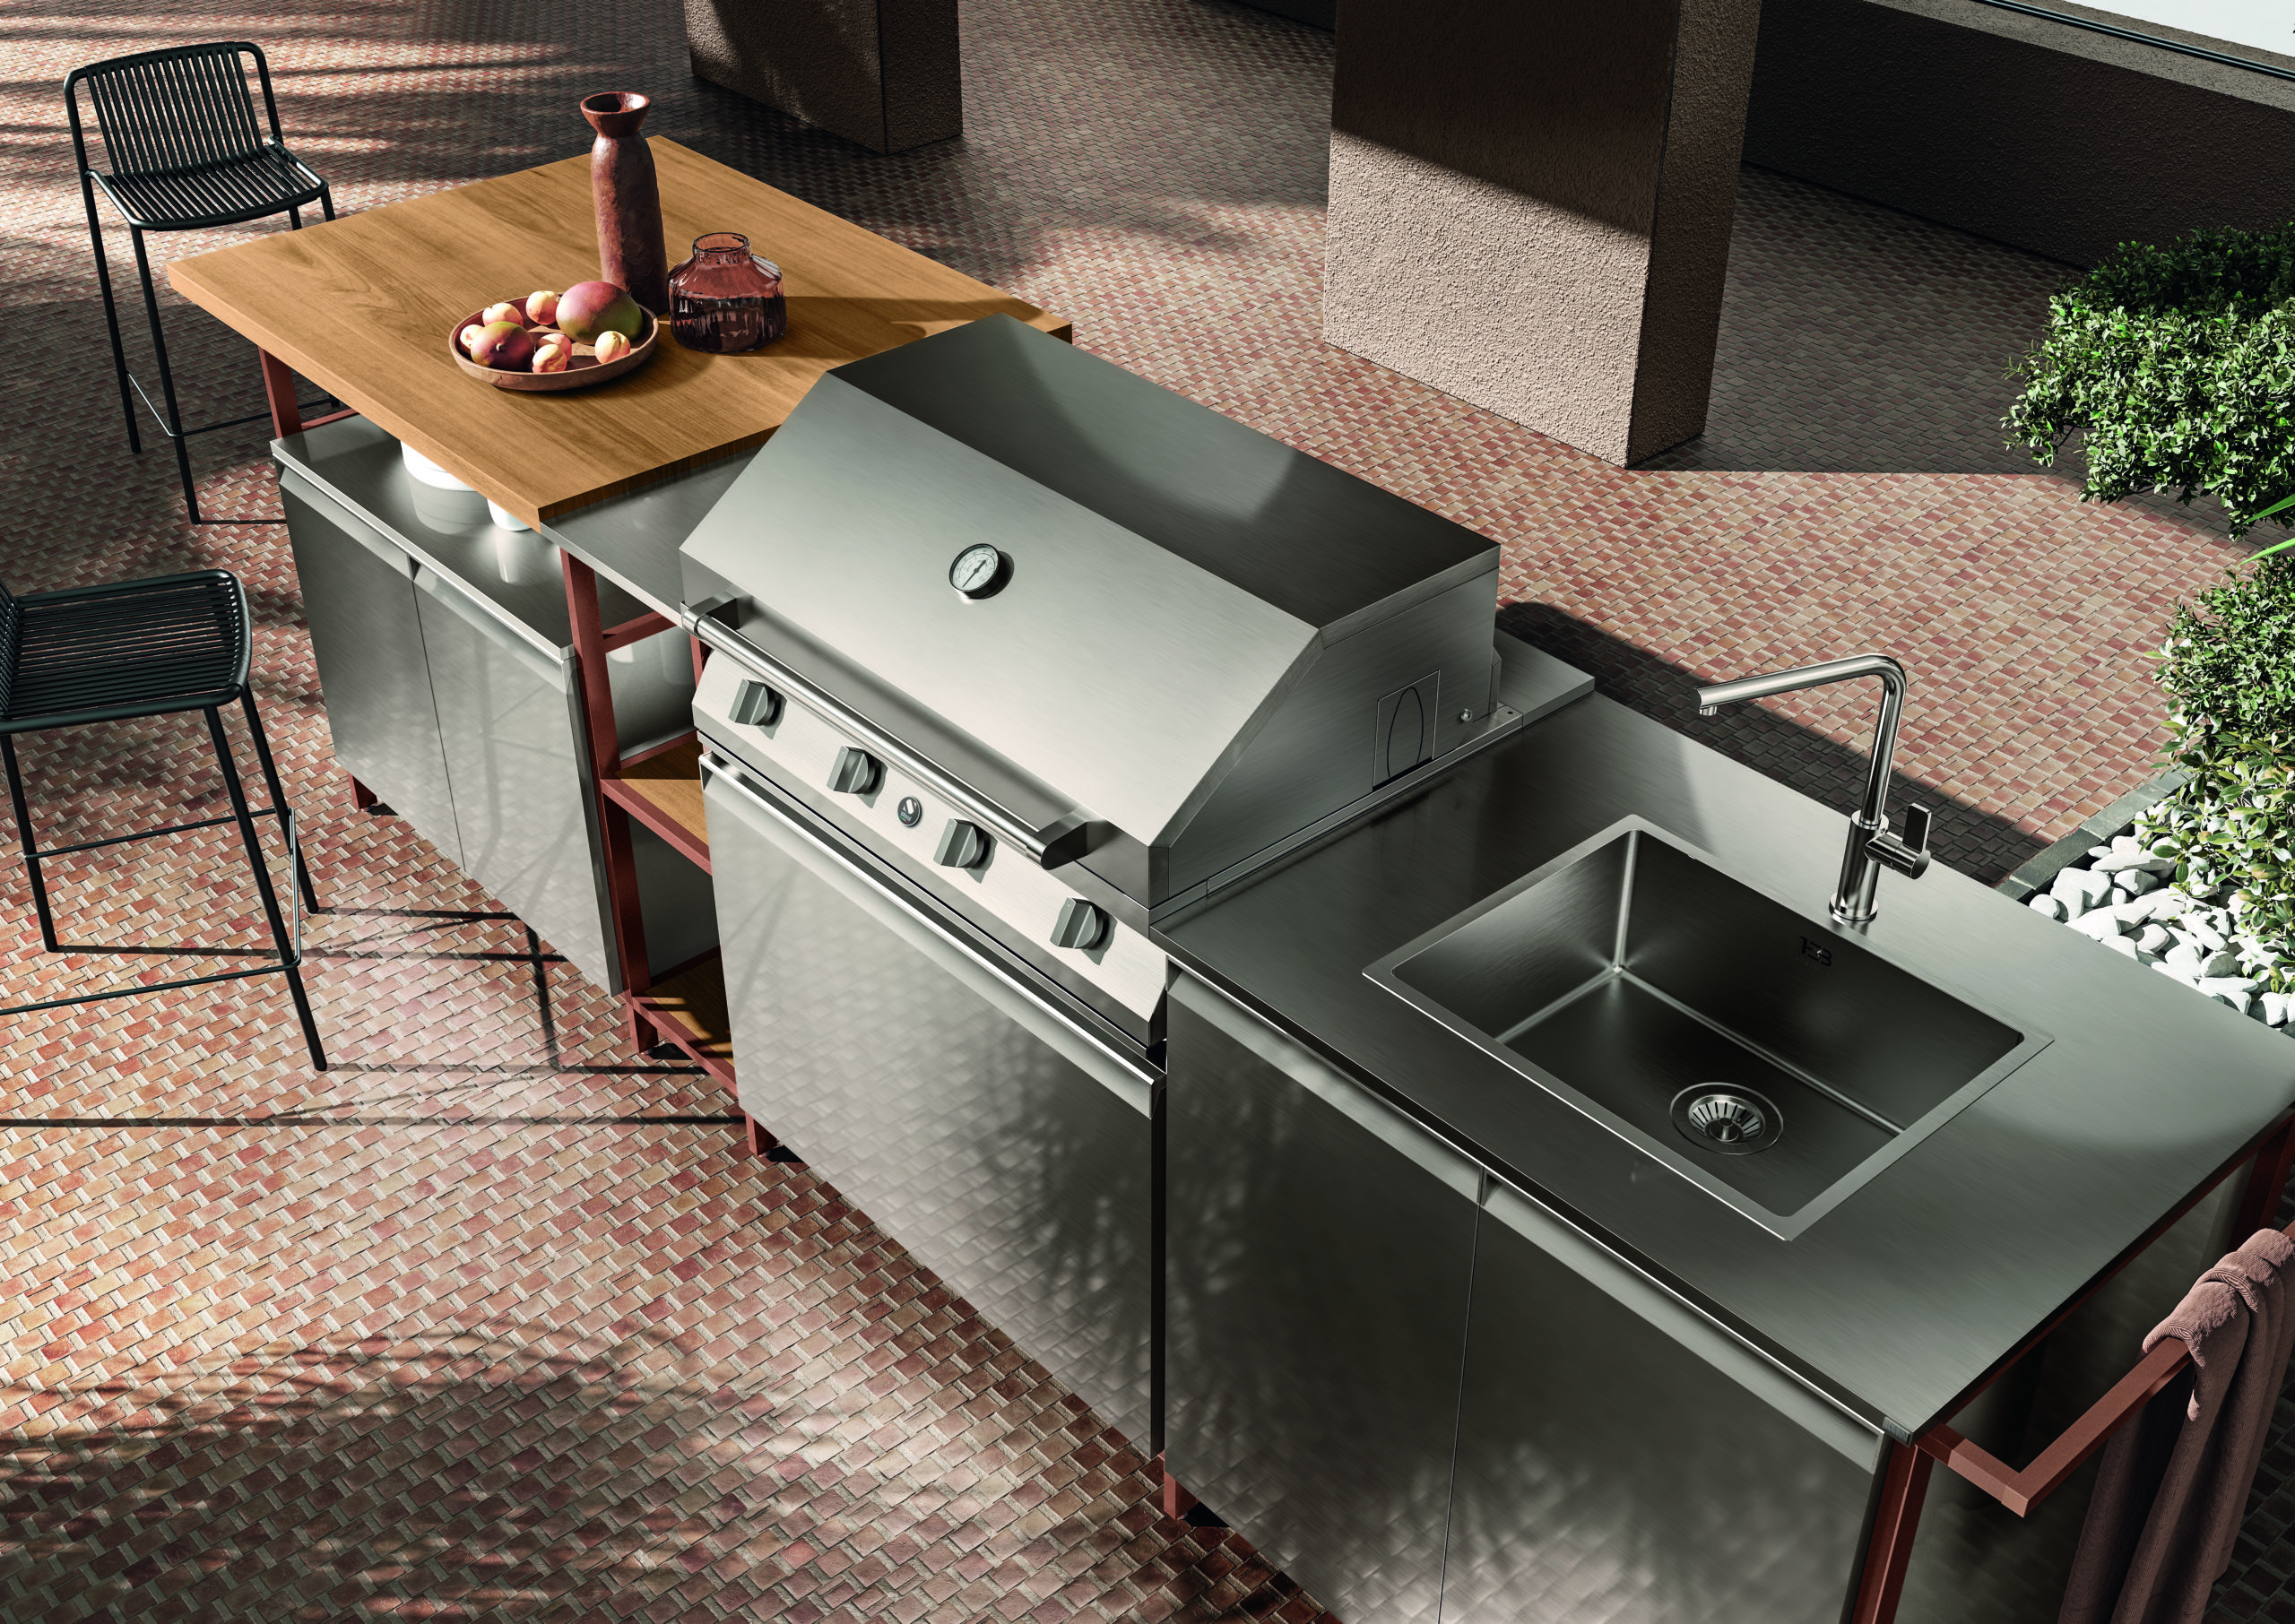 From the evolution of the Formalia collection emerges Formalia Outdoor, the first Scavolini kitchen designed for outdoors